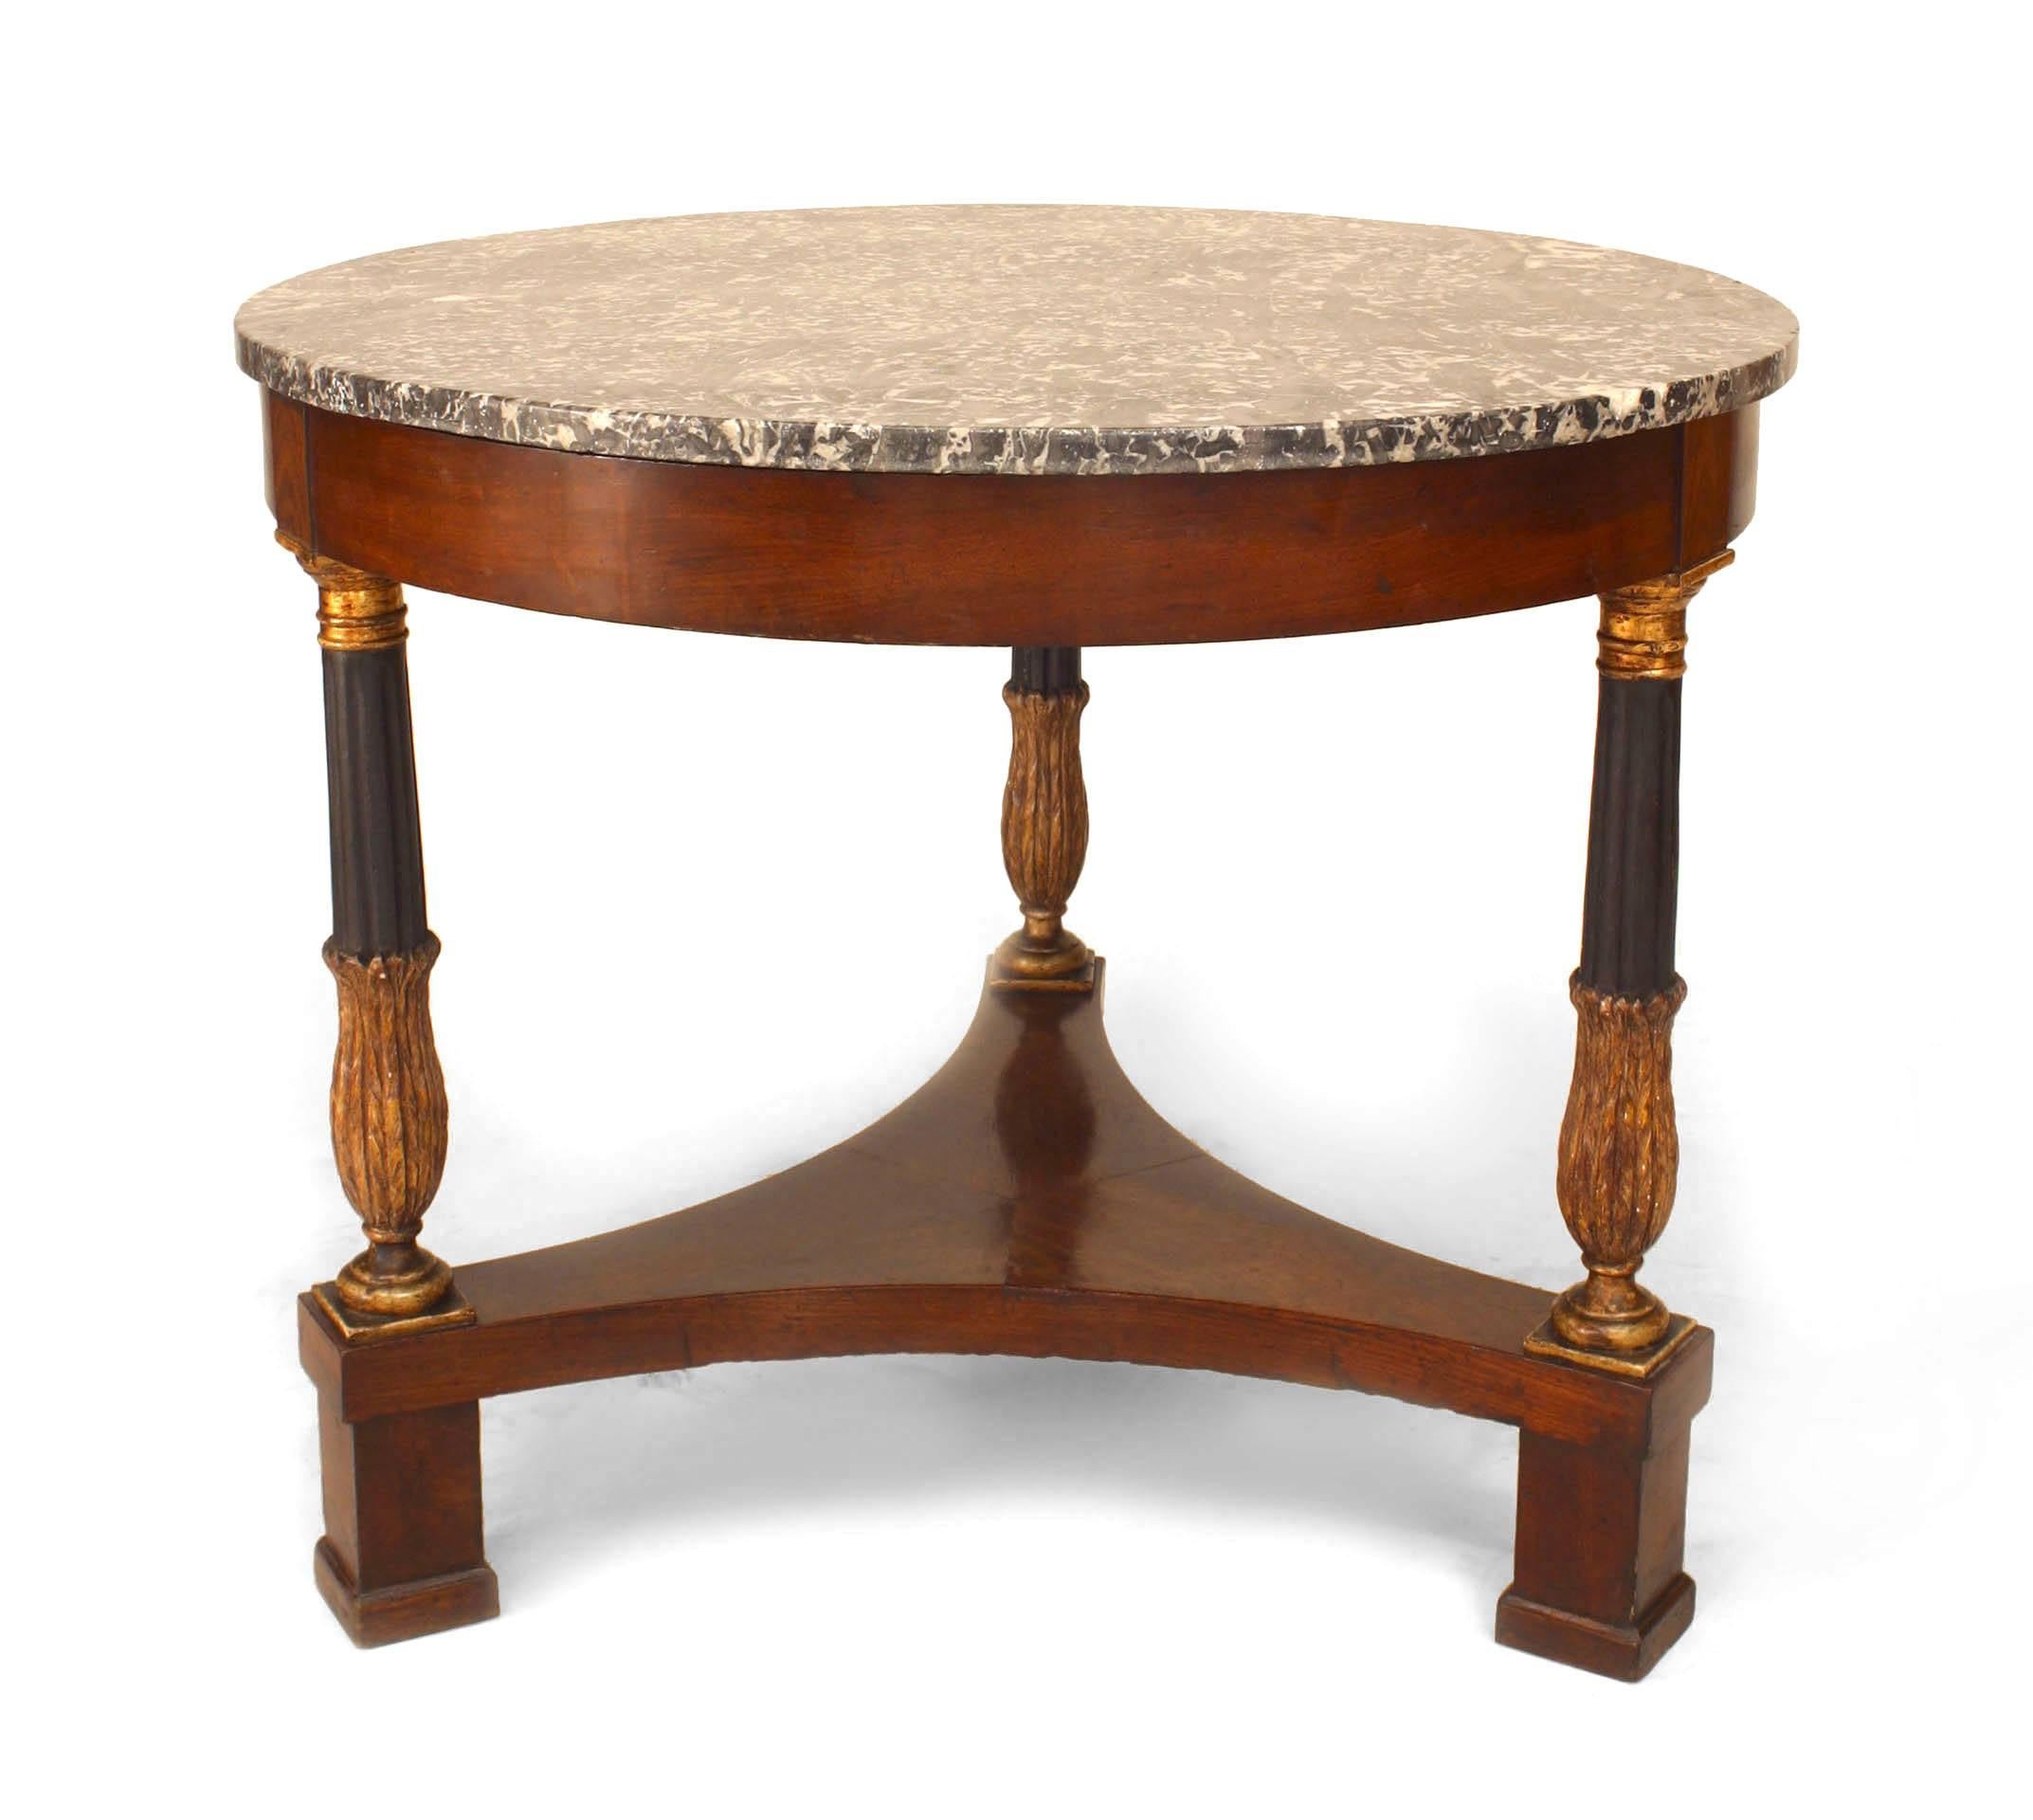 Italian Neoclassic mahogany center table dating to the second quarter of the nineteenth century. The table's round black and grey marble top is supported by three gilt trimmed and ebonized legs spread across an elevated triform stretcher.